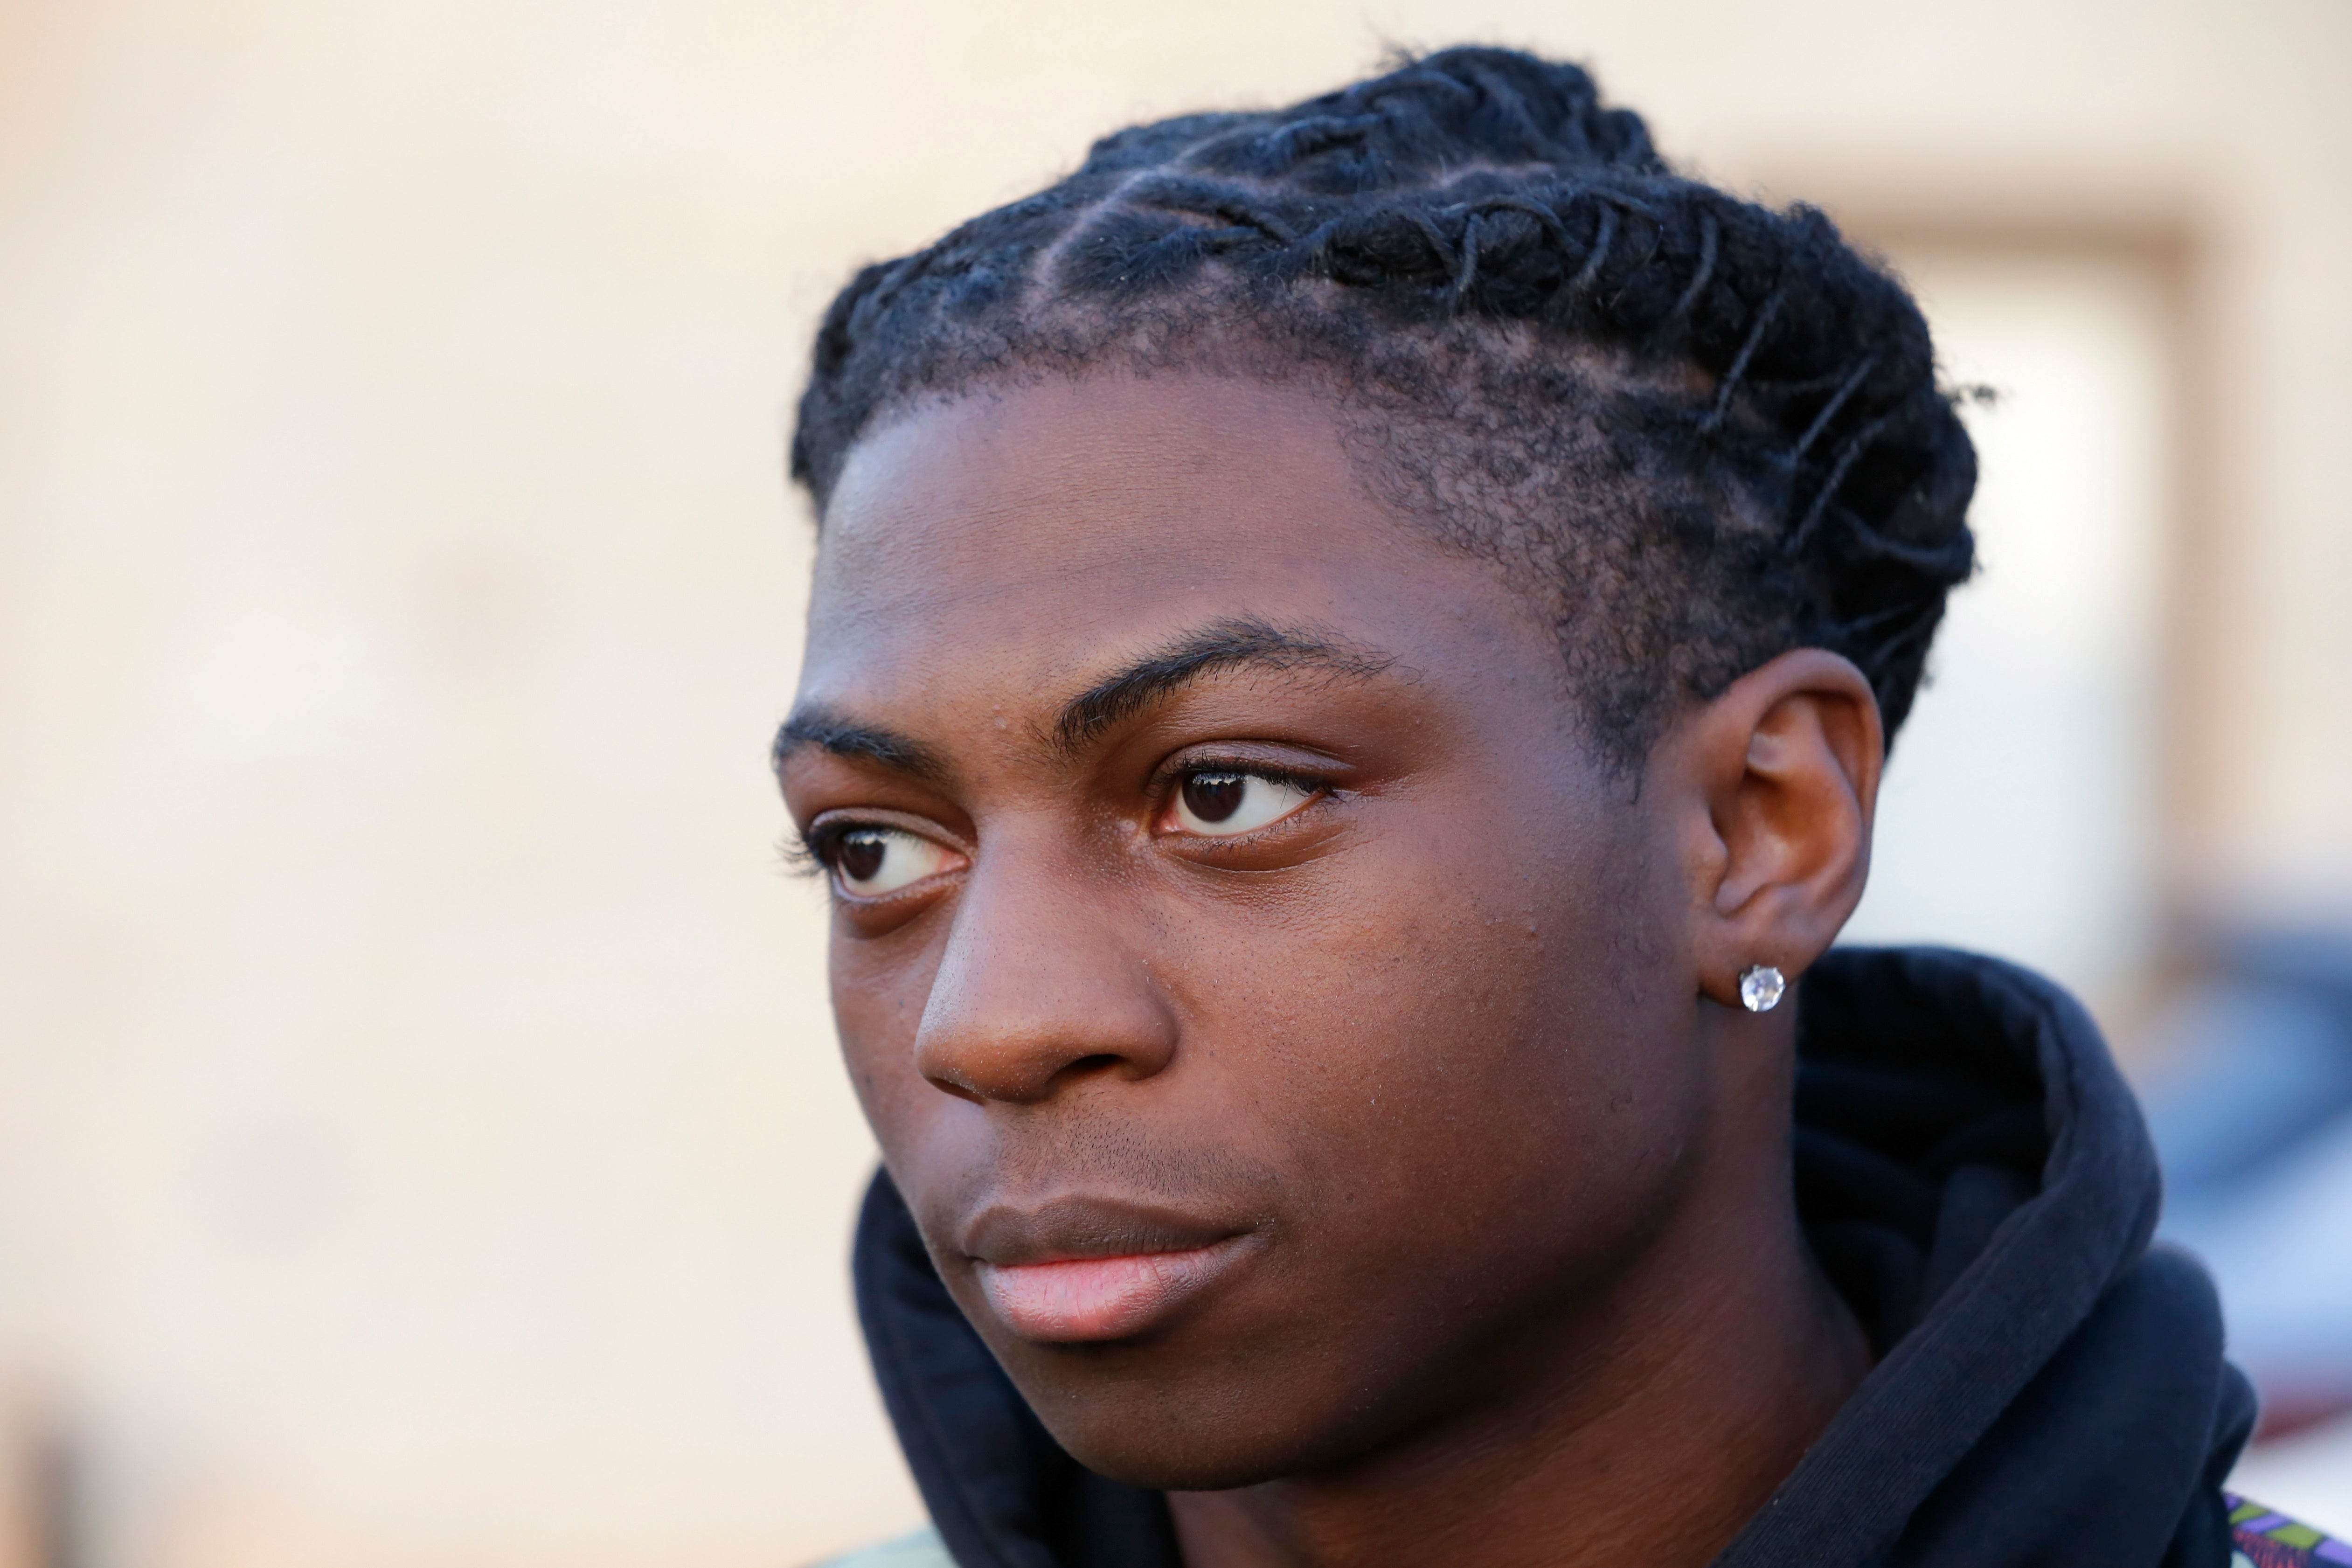 A Black teenager who was suspended from a Texas high school for his loc hairstyle in September has been given another in-school suspension